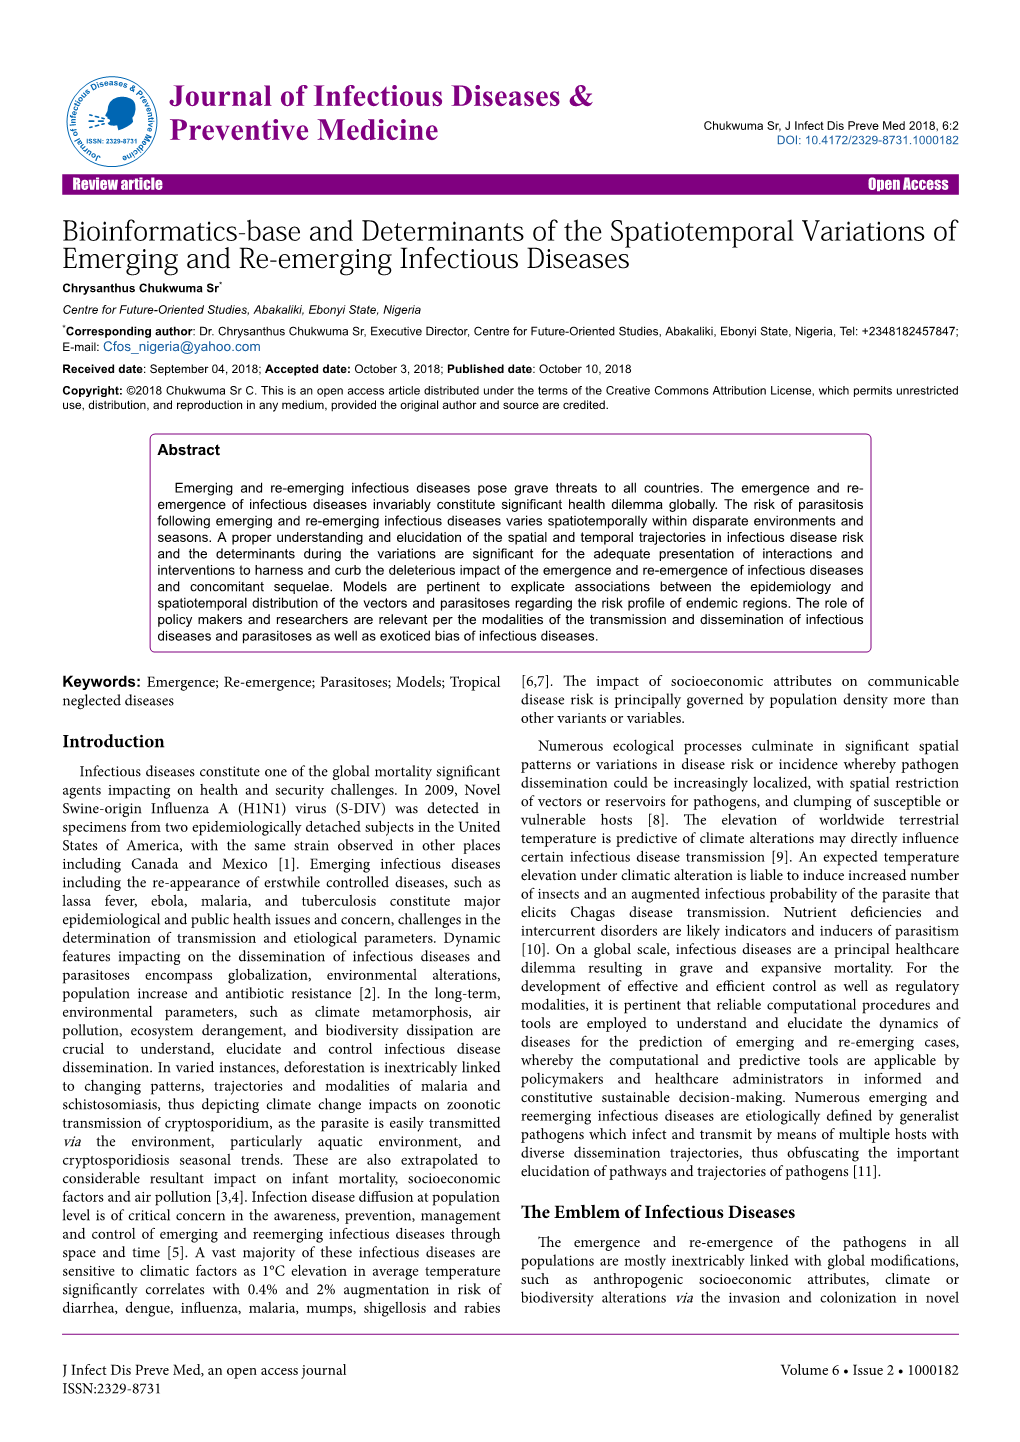 Bioinformatics-Base and Determinants of the Spatiotemporal Variations Of